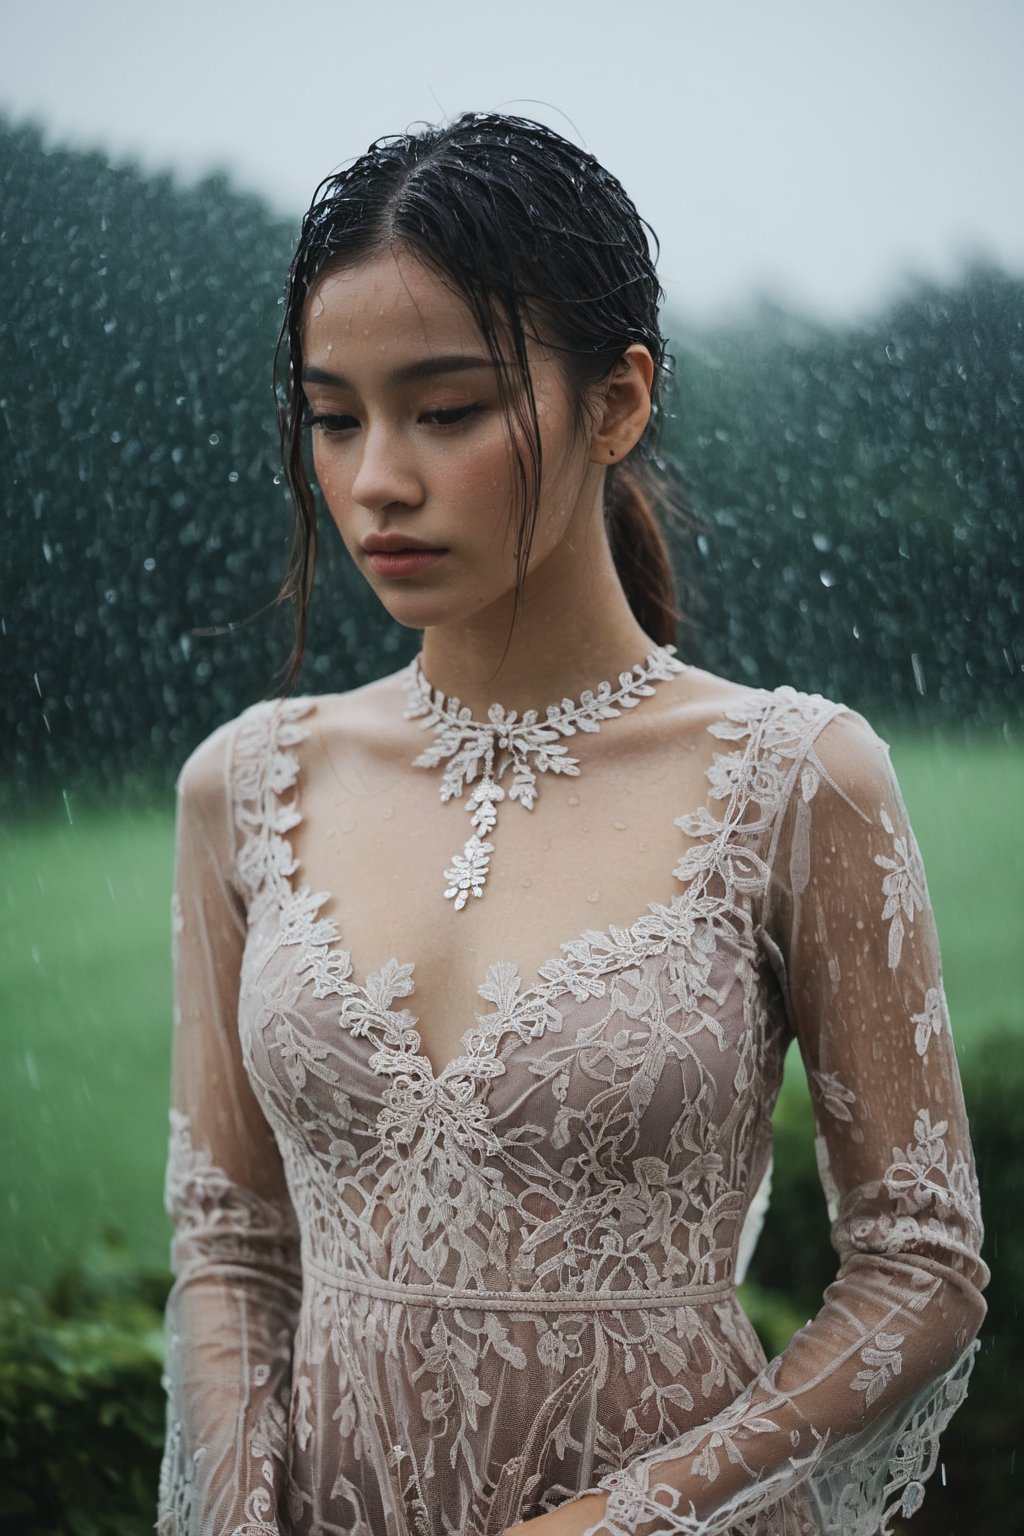 upper body of young woman wearing lace dress standing in the rain